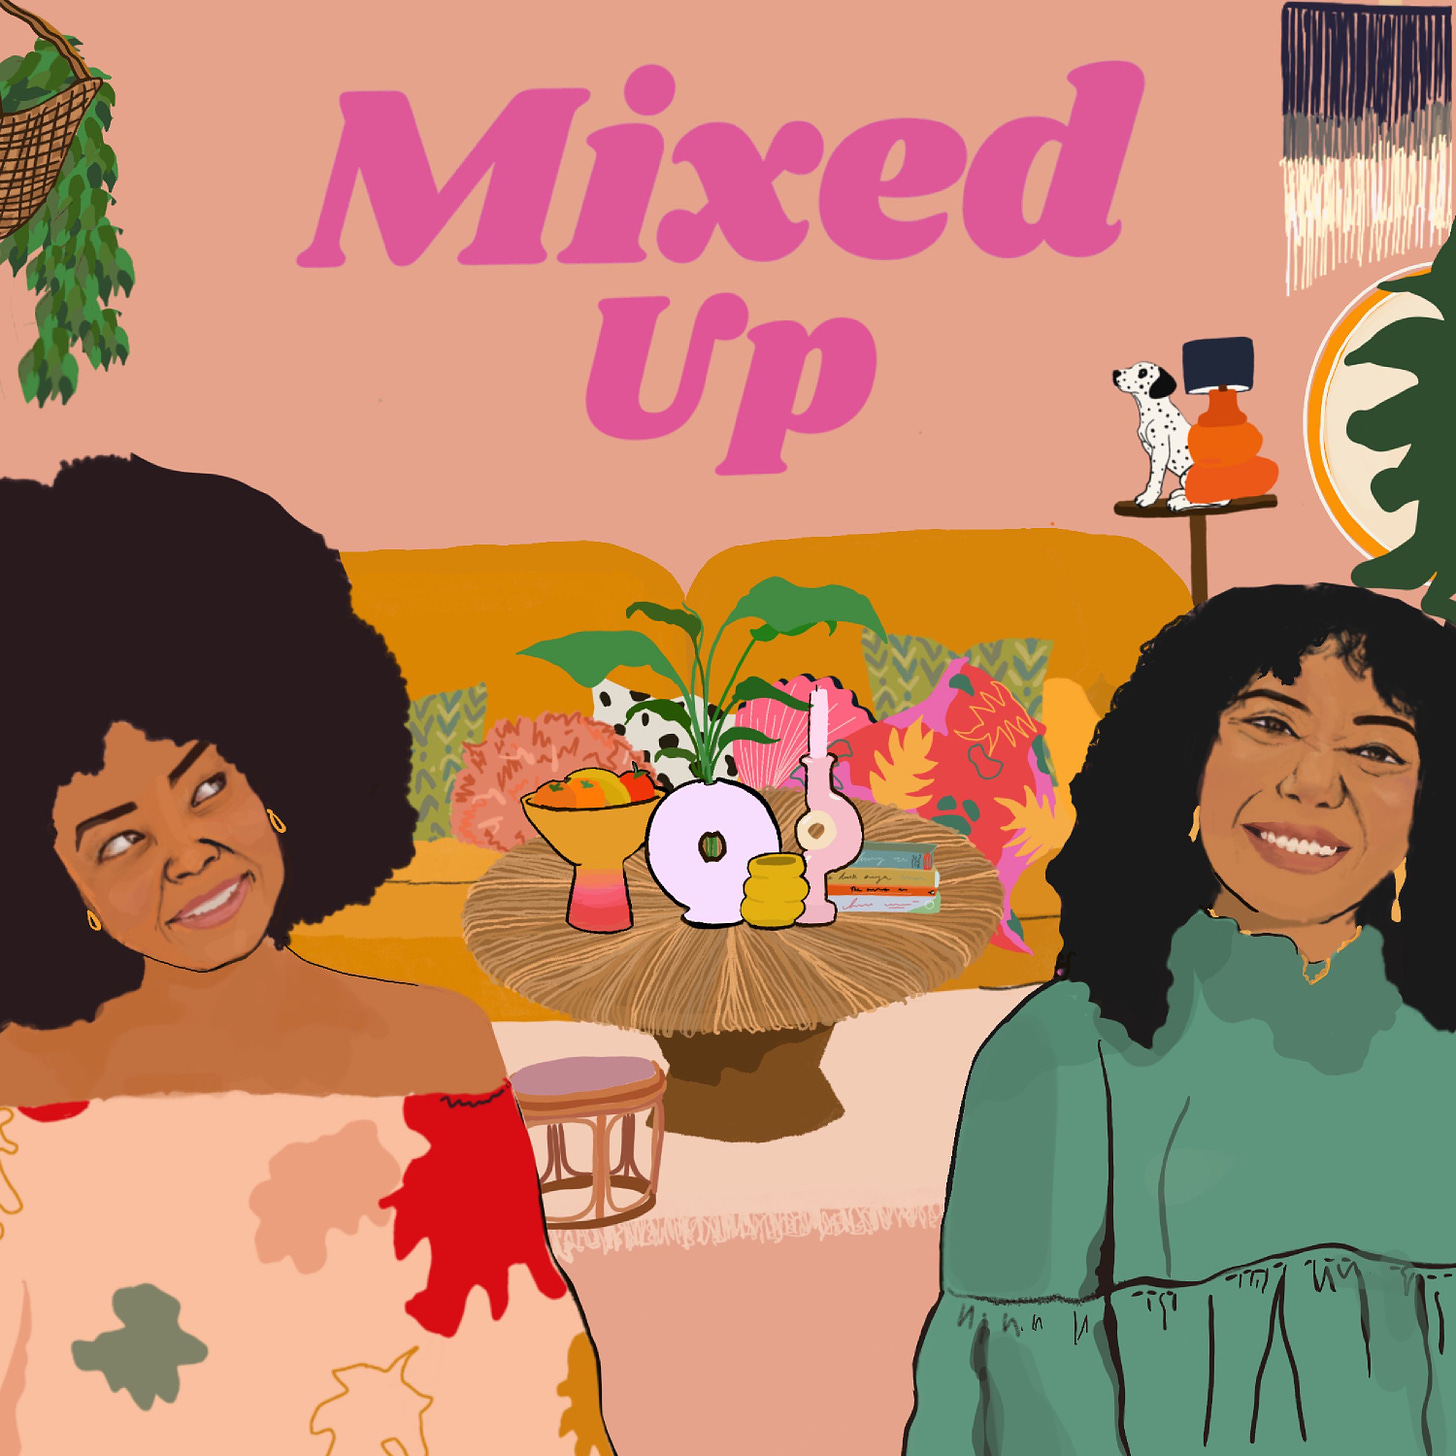 The artwork for Mixed Up podcast